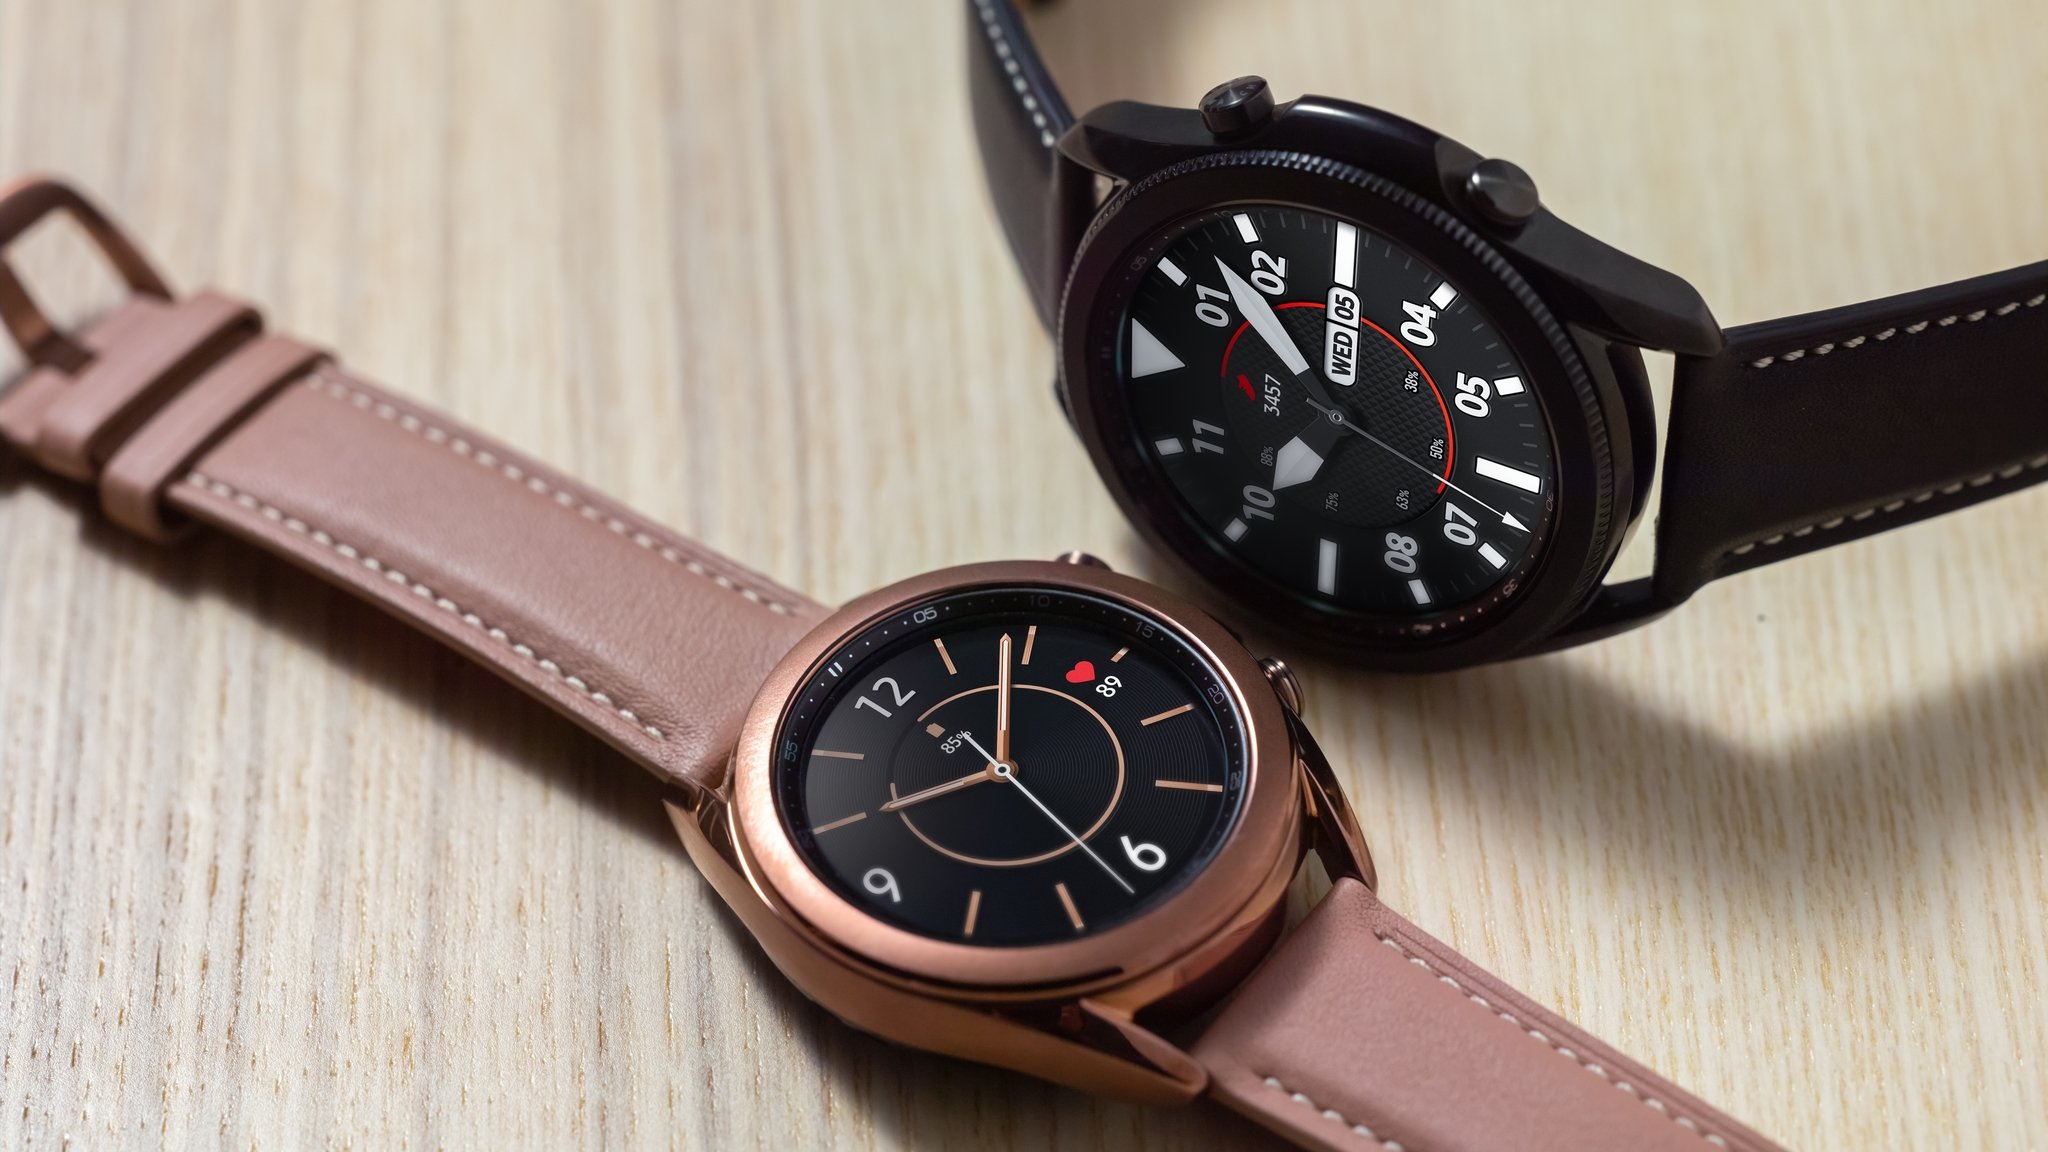 Samsung Galaxy Watch 3 Two Sizes Official Lifestyle